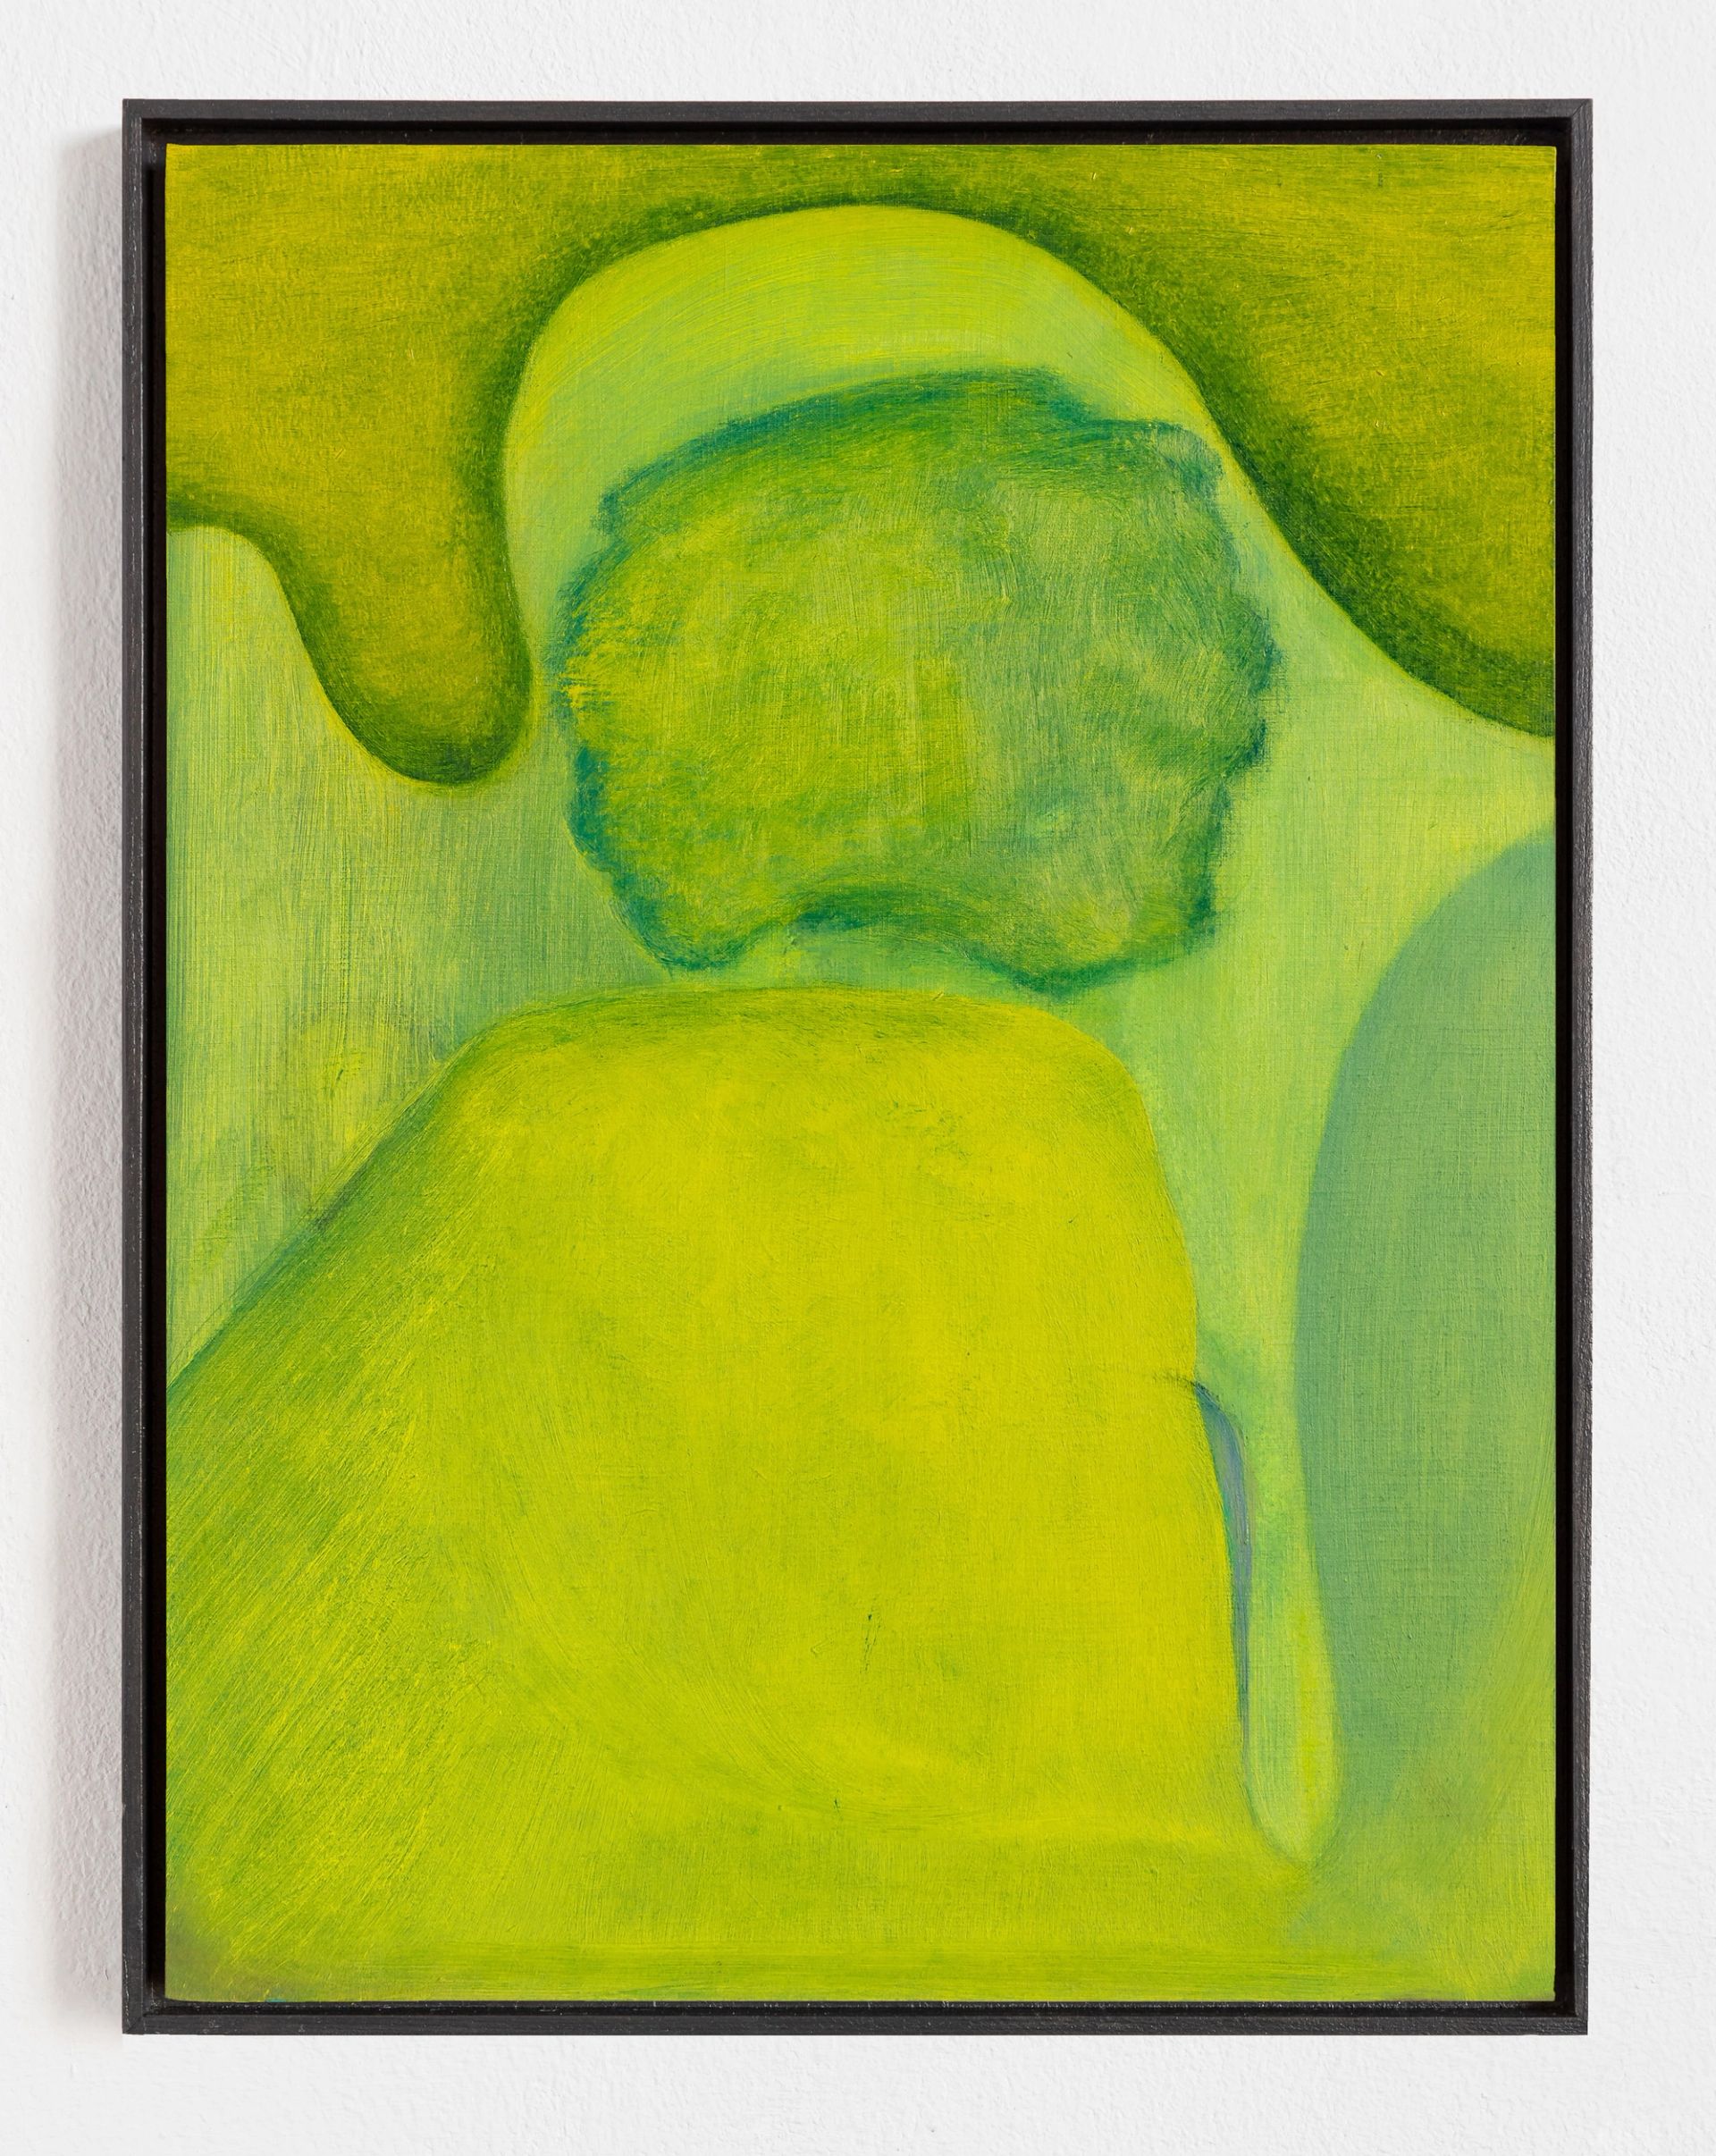 Untitled, 2021, oil on paper on MDF in artists frame, 39.8 × 29.8 cm